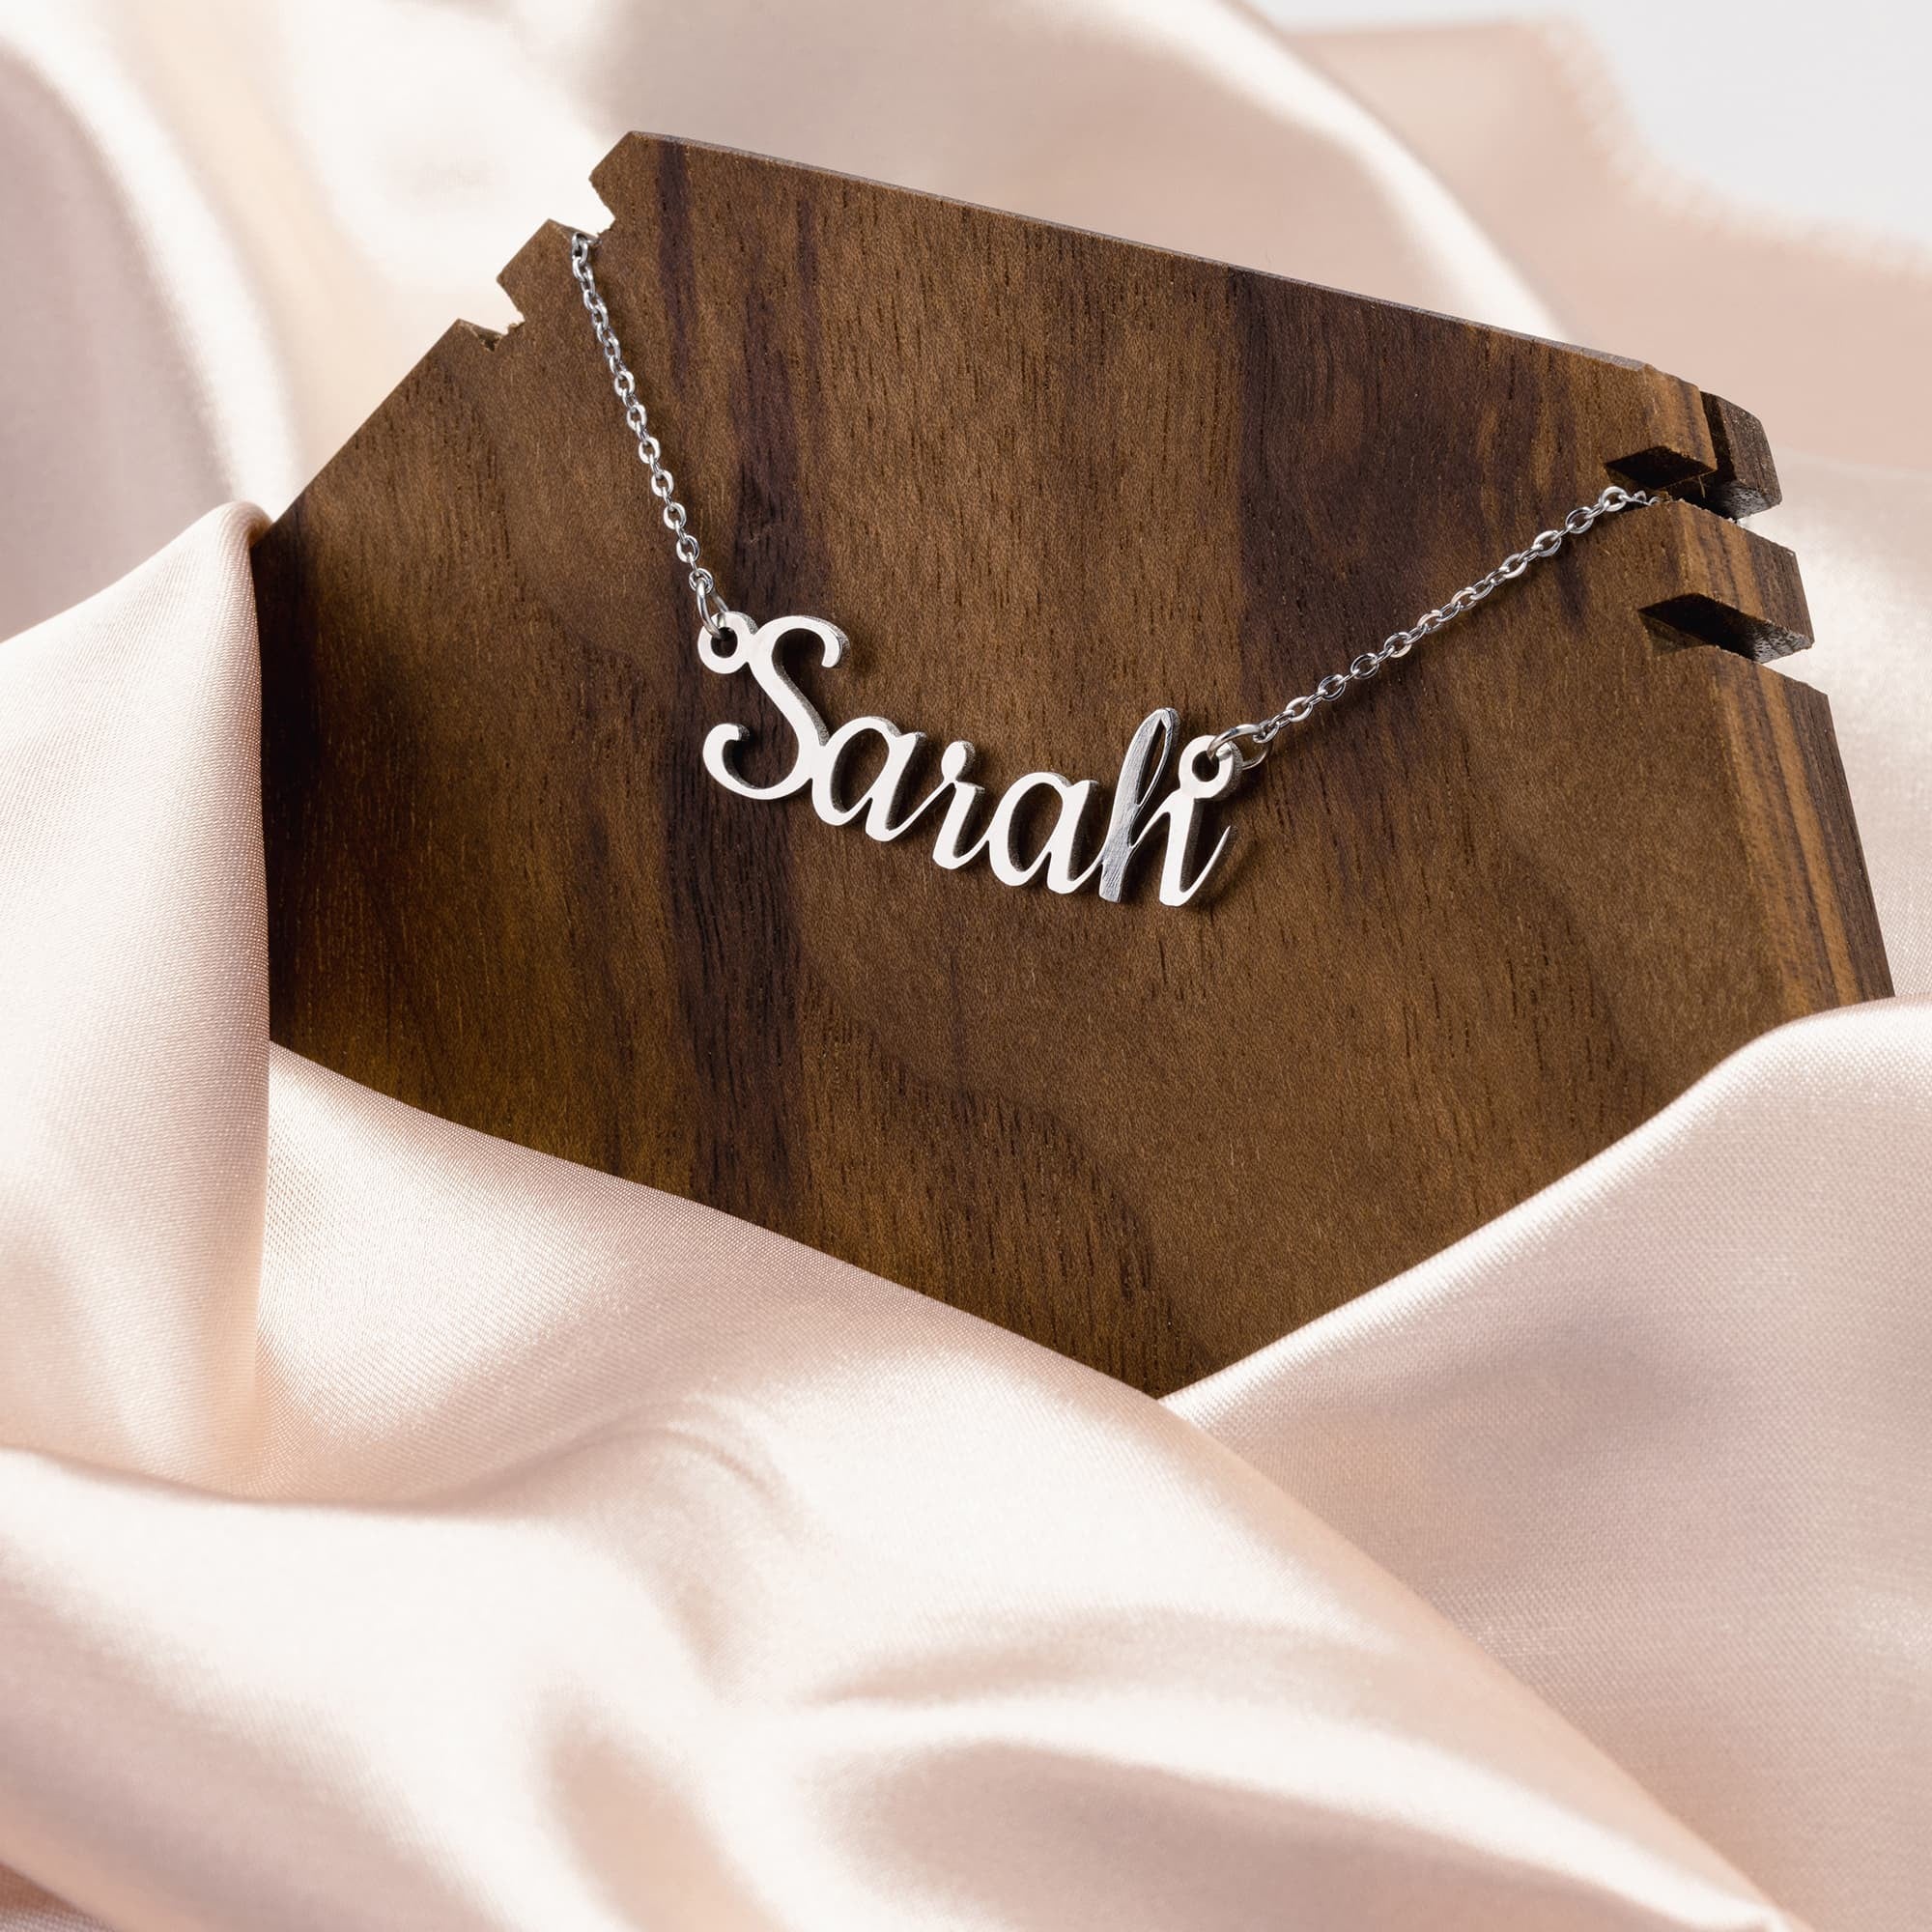 Personalized Name Necklace in Stainless Steel Gold, Rose Gold, Silver